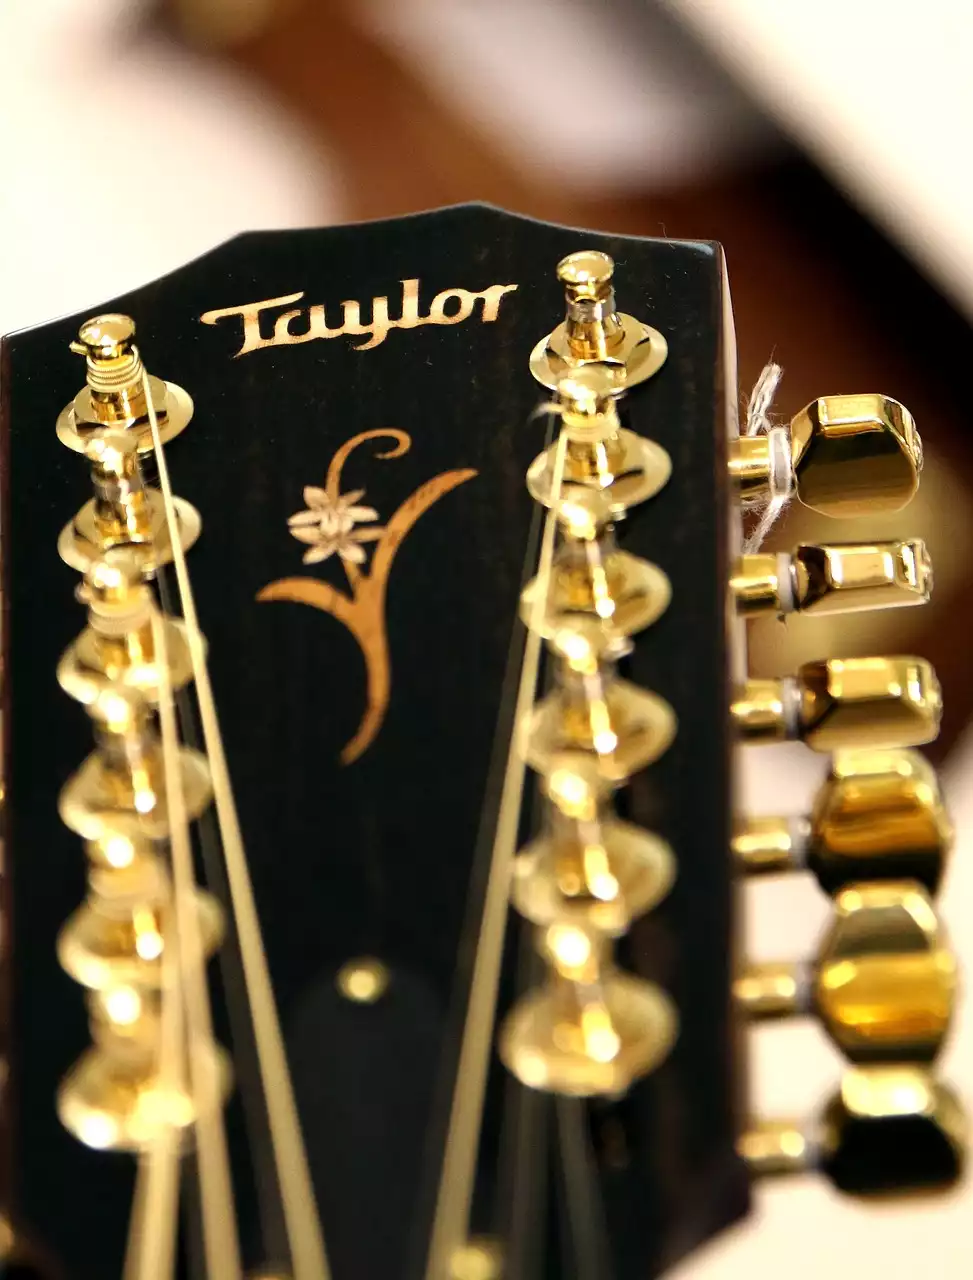 The history of Taylor Guitars